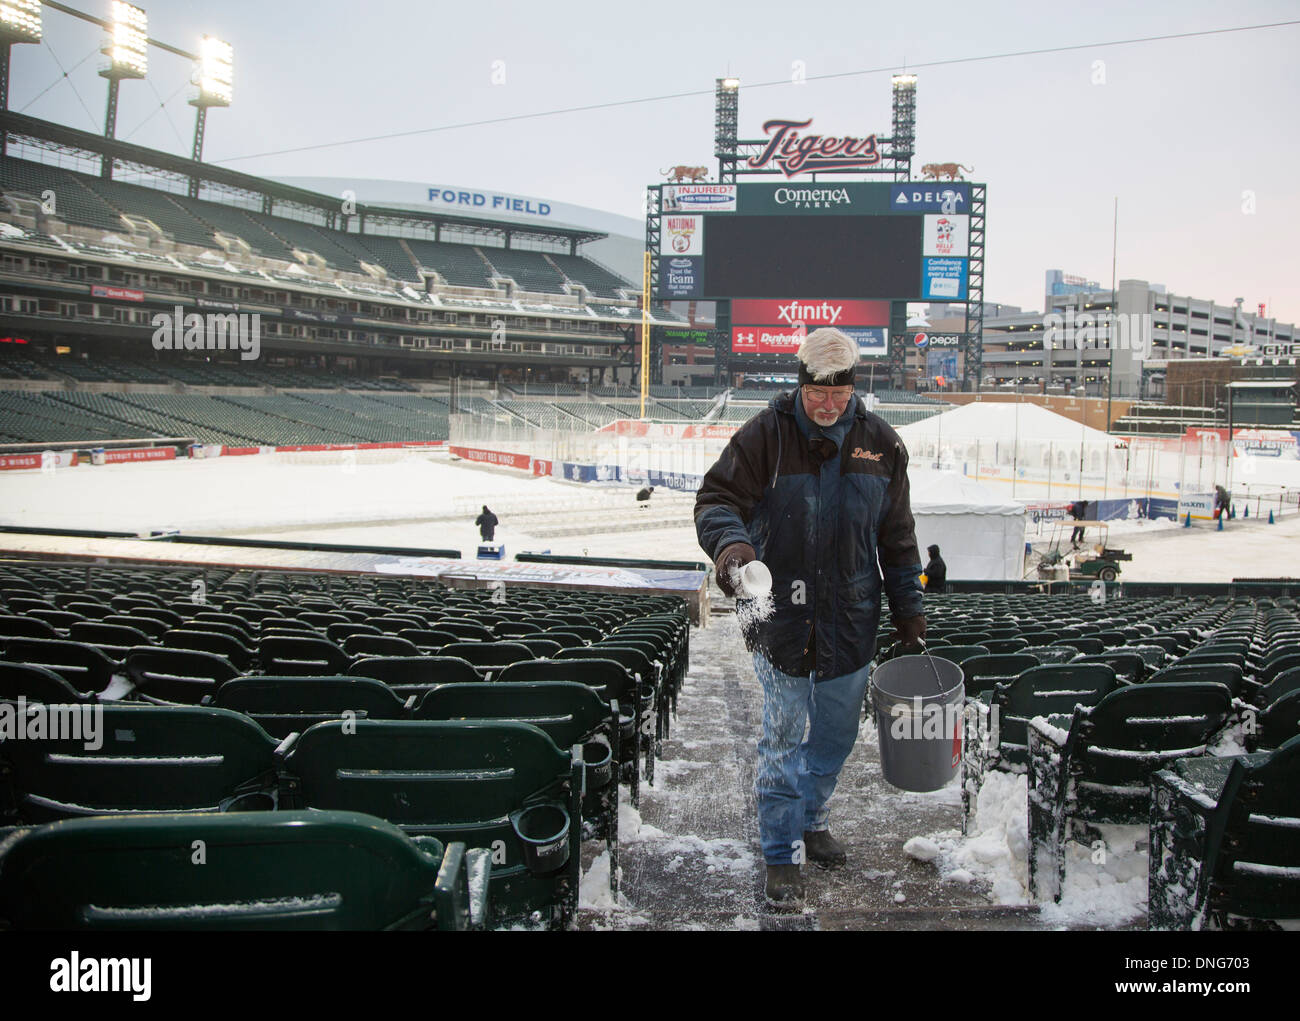 A worker sprinkles de-icer on steps at Comerica Park before an ice hockey game during the Hockeytown Winter Festival. Stock Photo